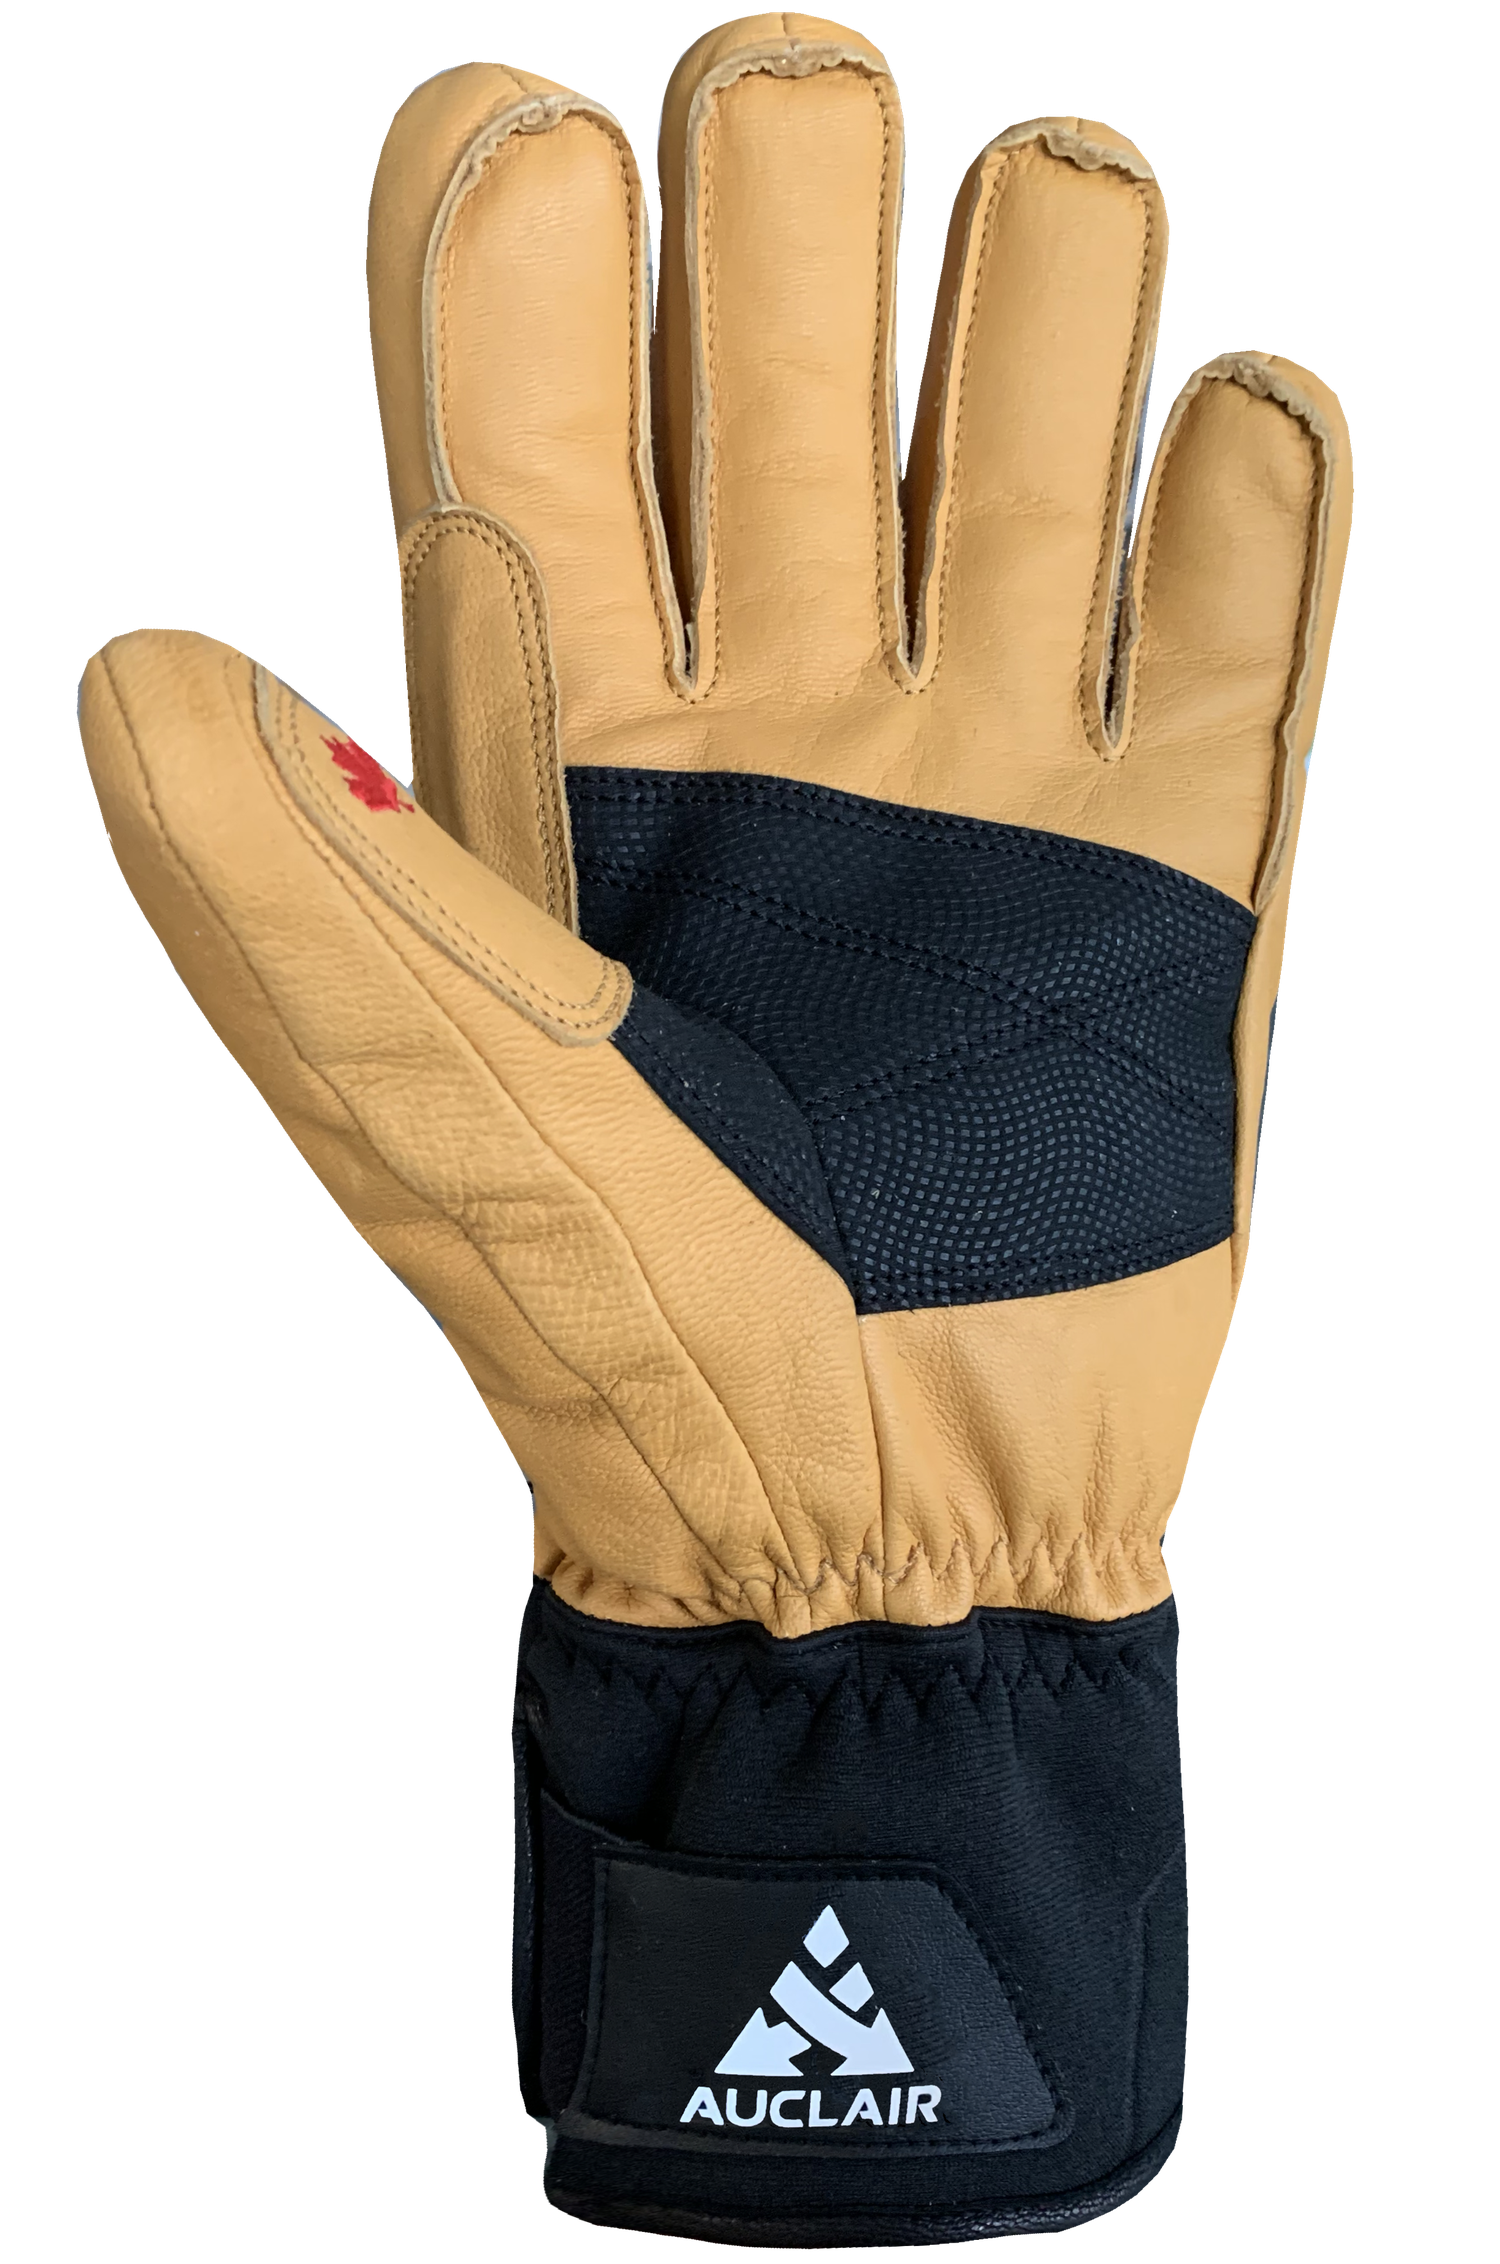 Outseam Gloves - Adult, Tan/Black